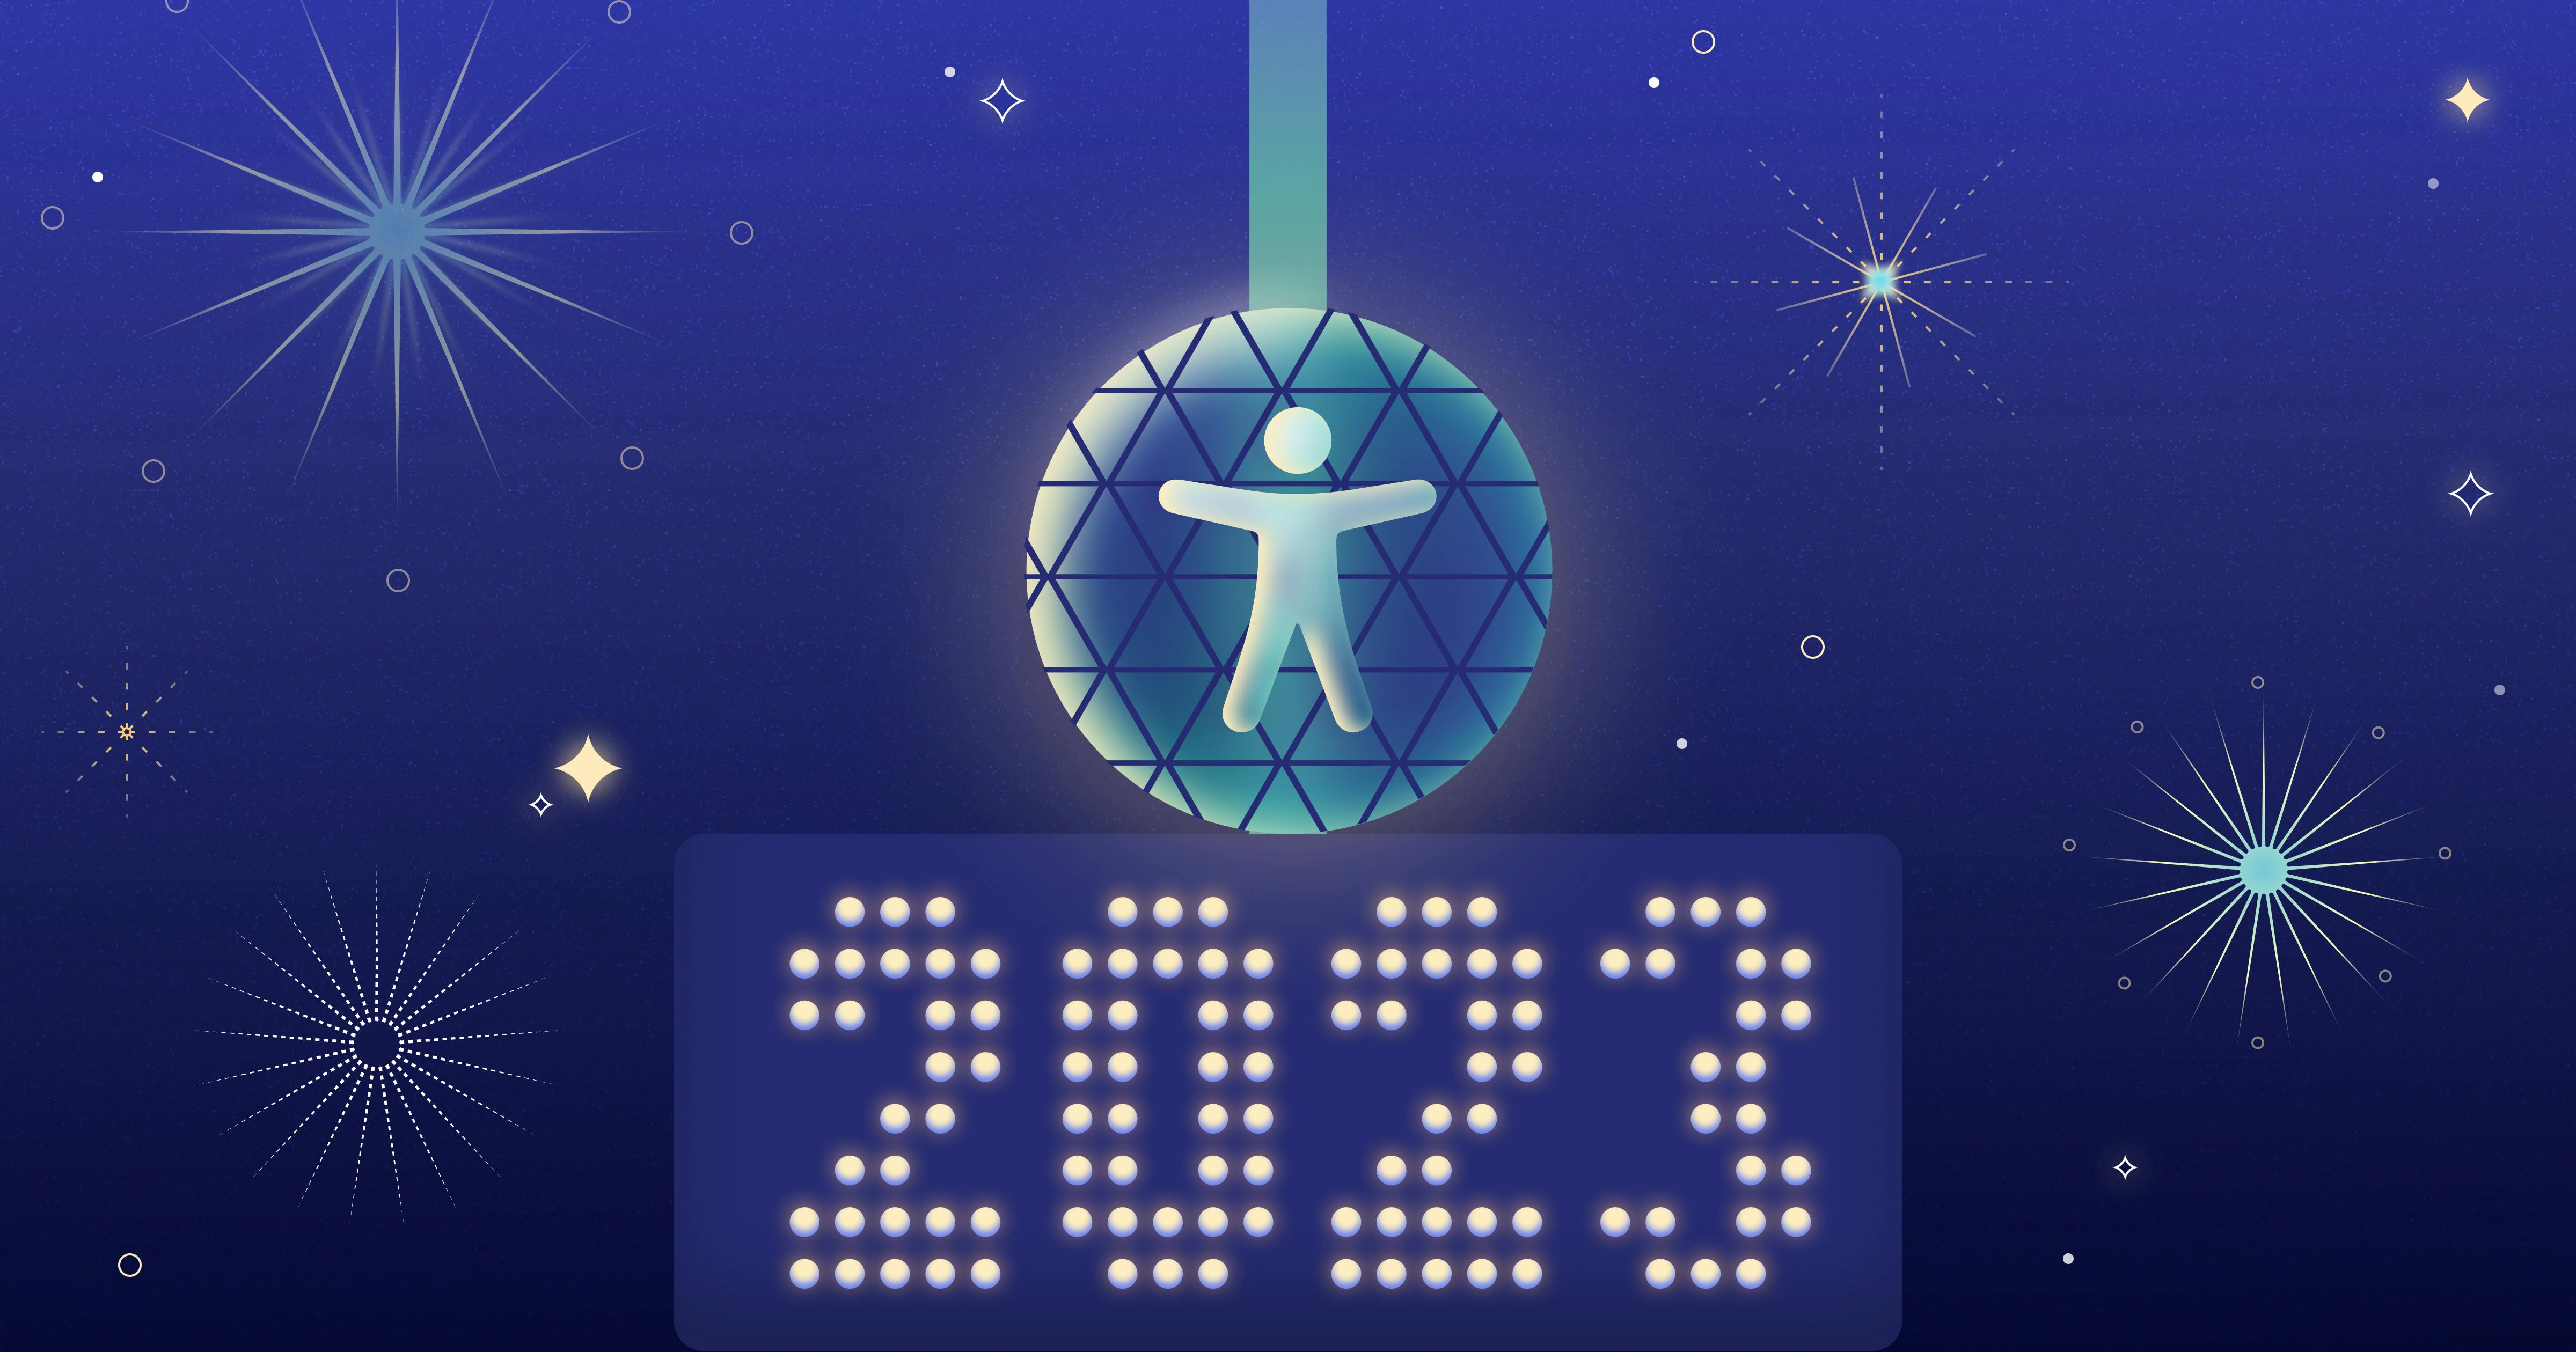 An accessibility symbol in the middle of a shiny disco ball, surrounded by fireworks. Beneath the disco ball, lightbulbs spell out 2023.